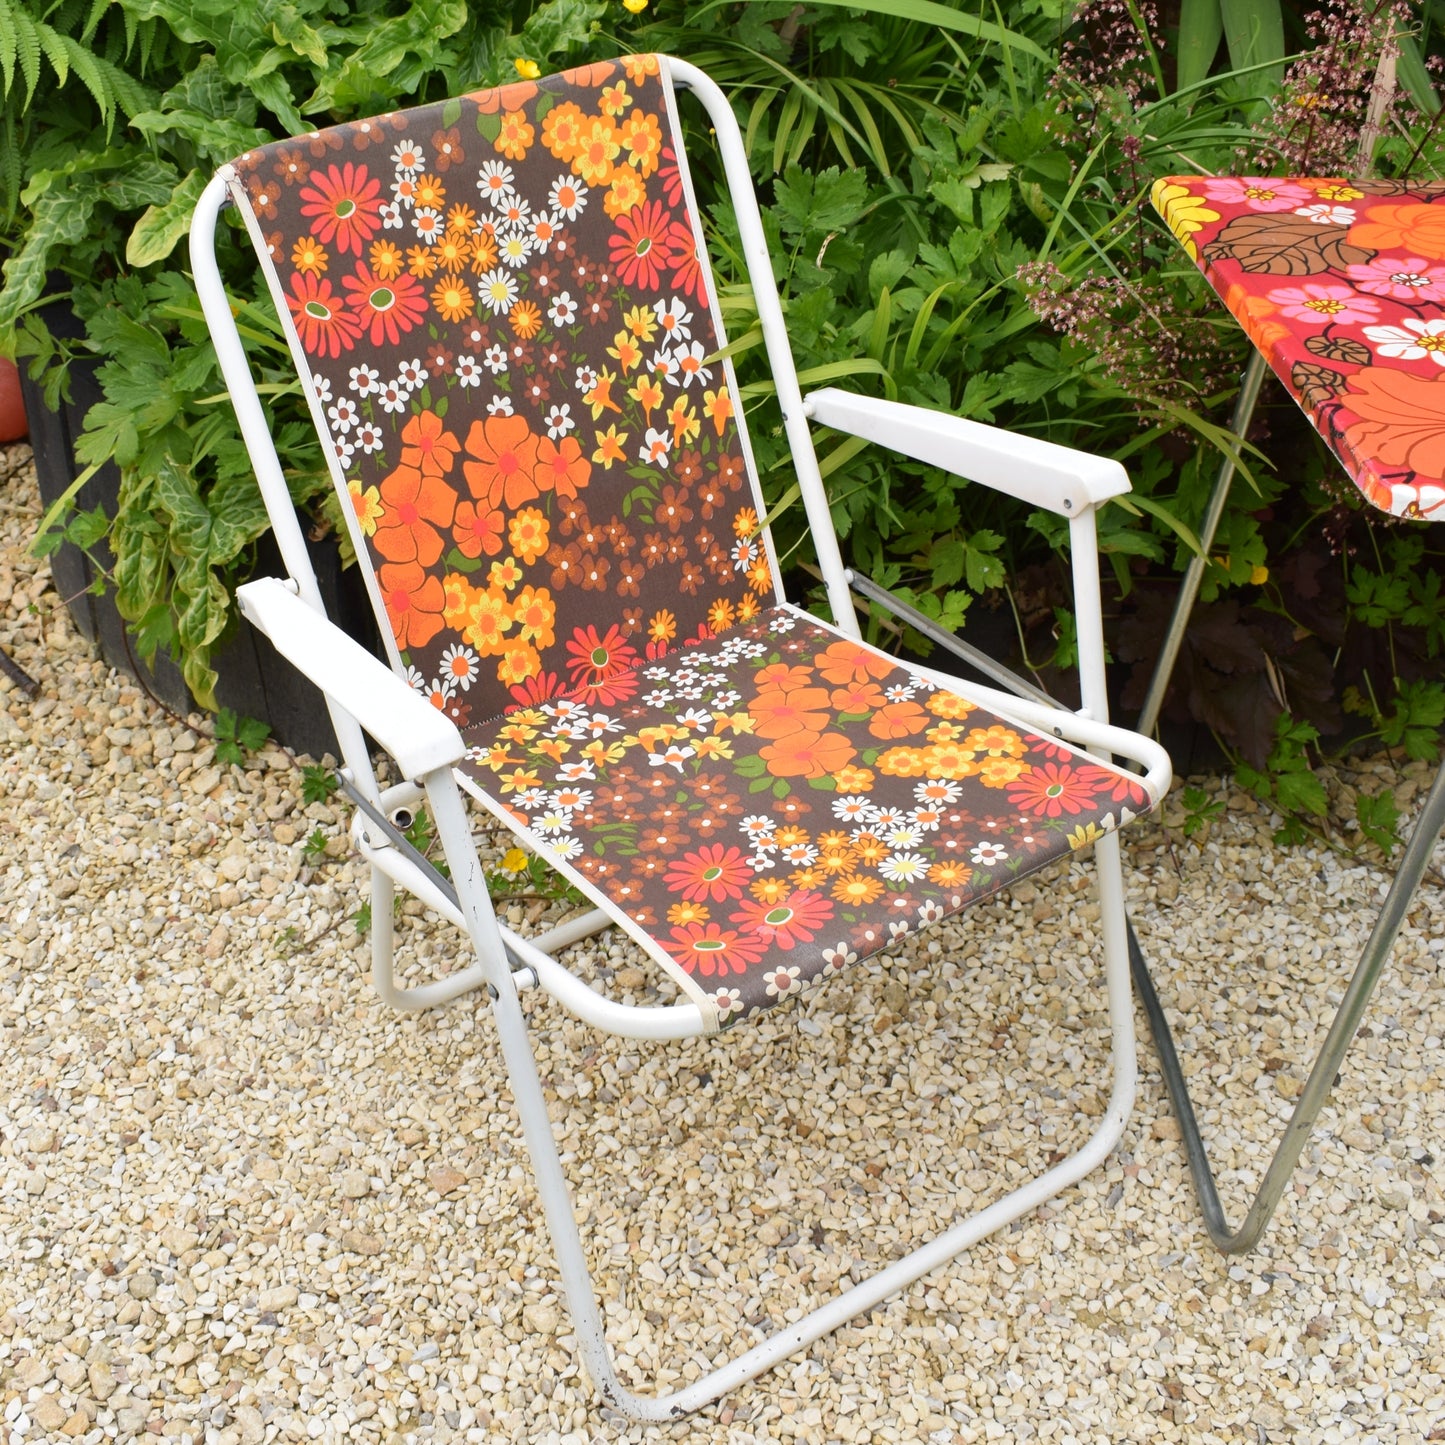 Vintage 1970s Folding Table & Chairs - Flower Power Designs